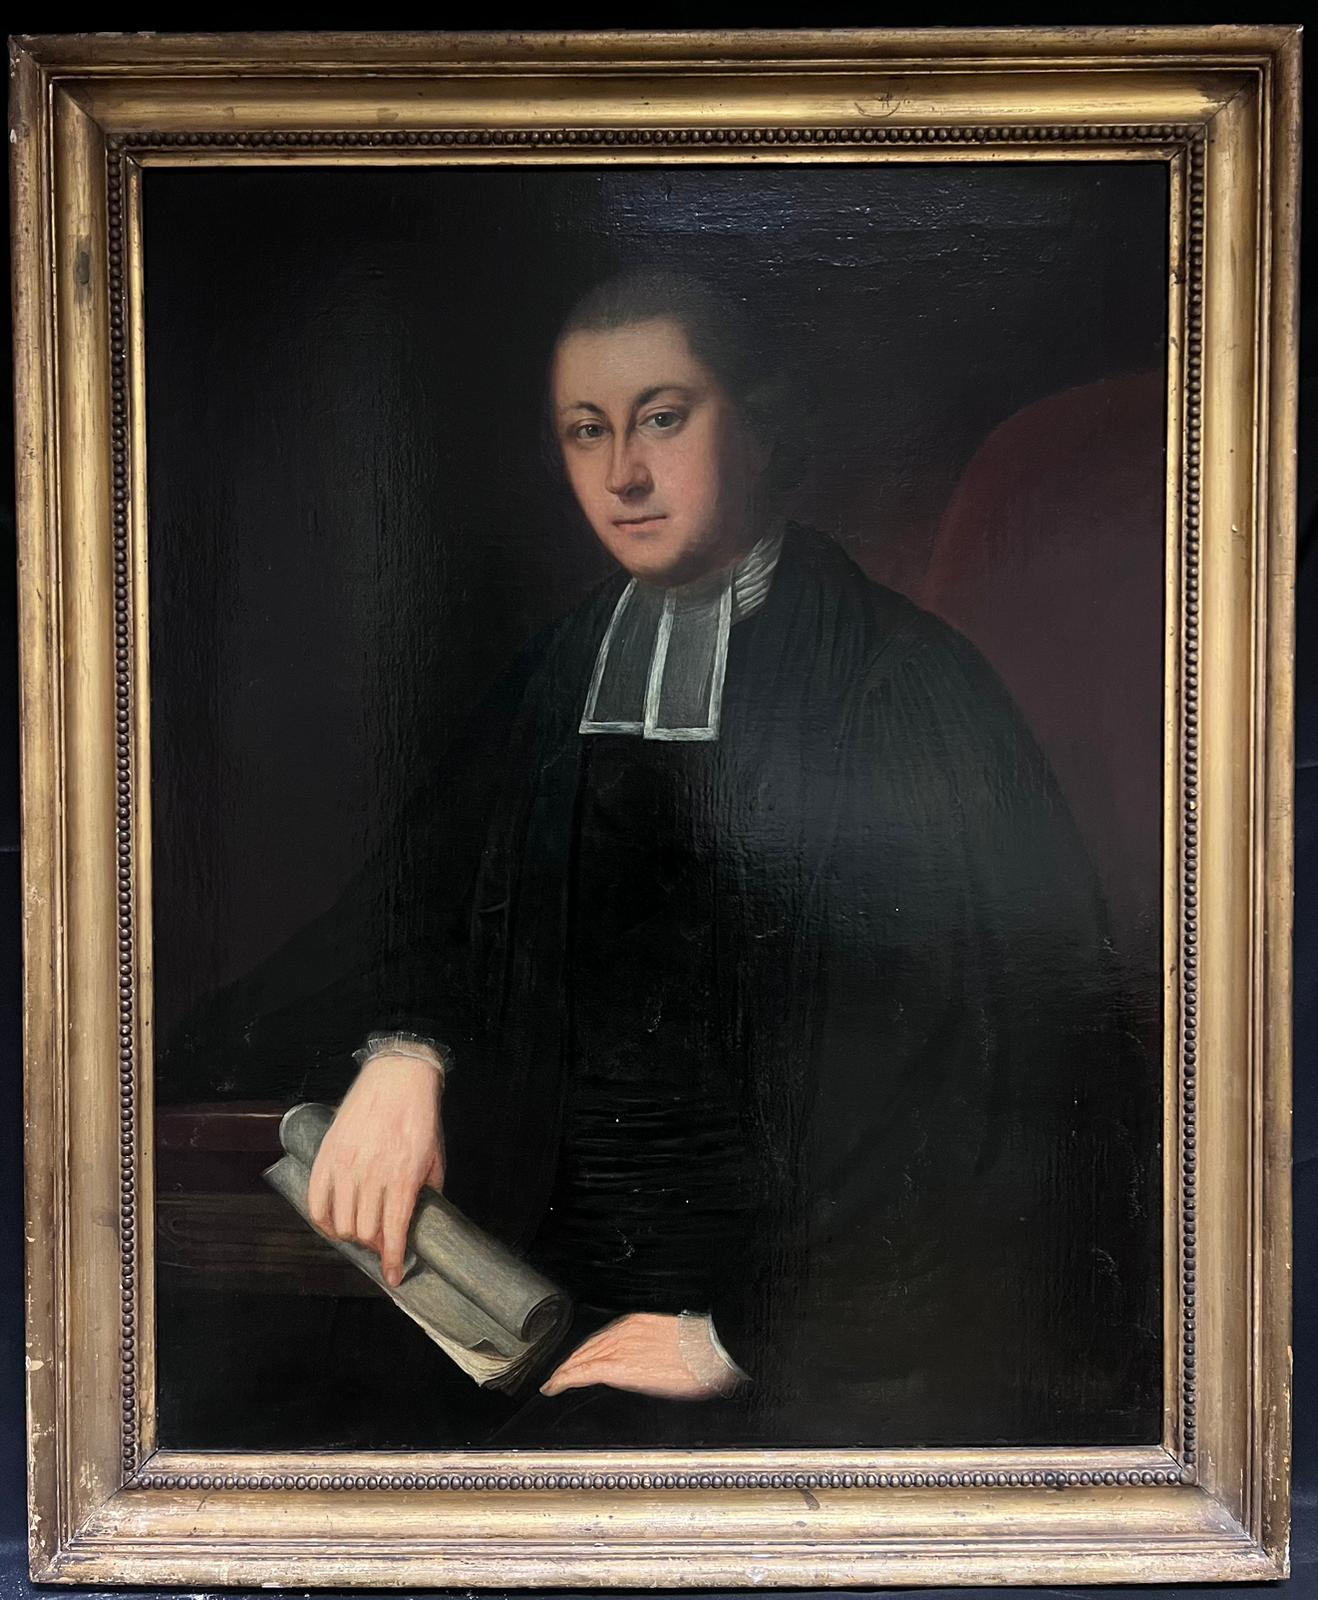 Very Large Antique English Oil Painting Portrait of Clerical Gentleman in Robes